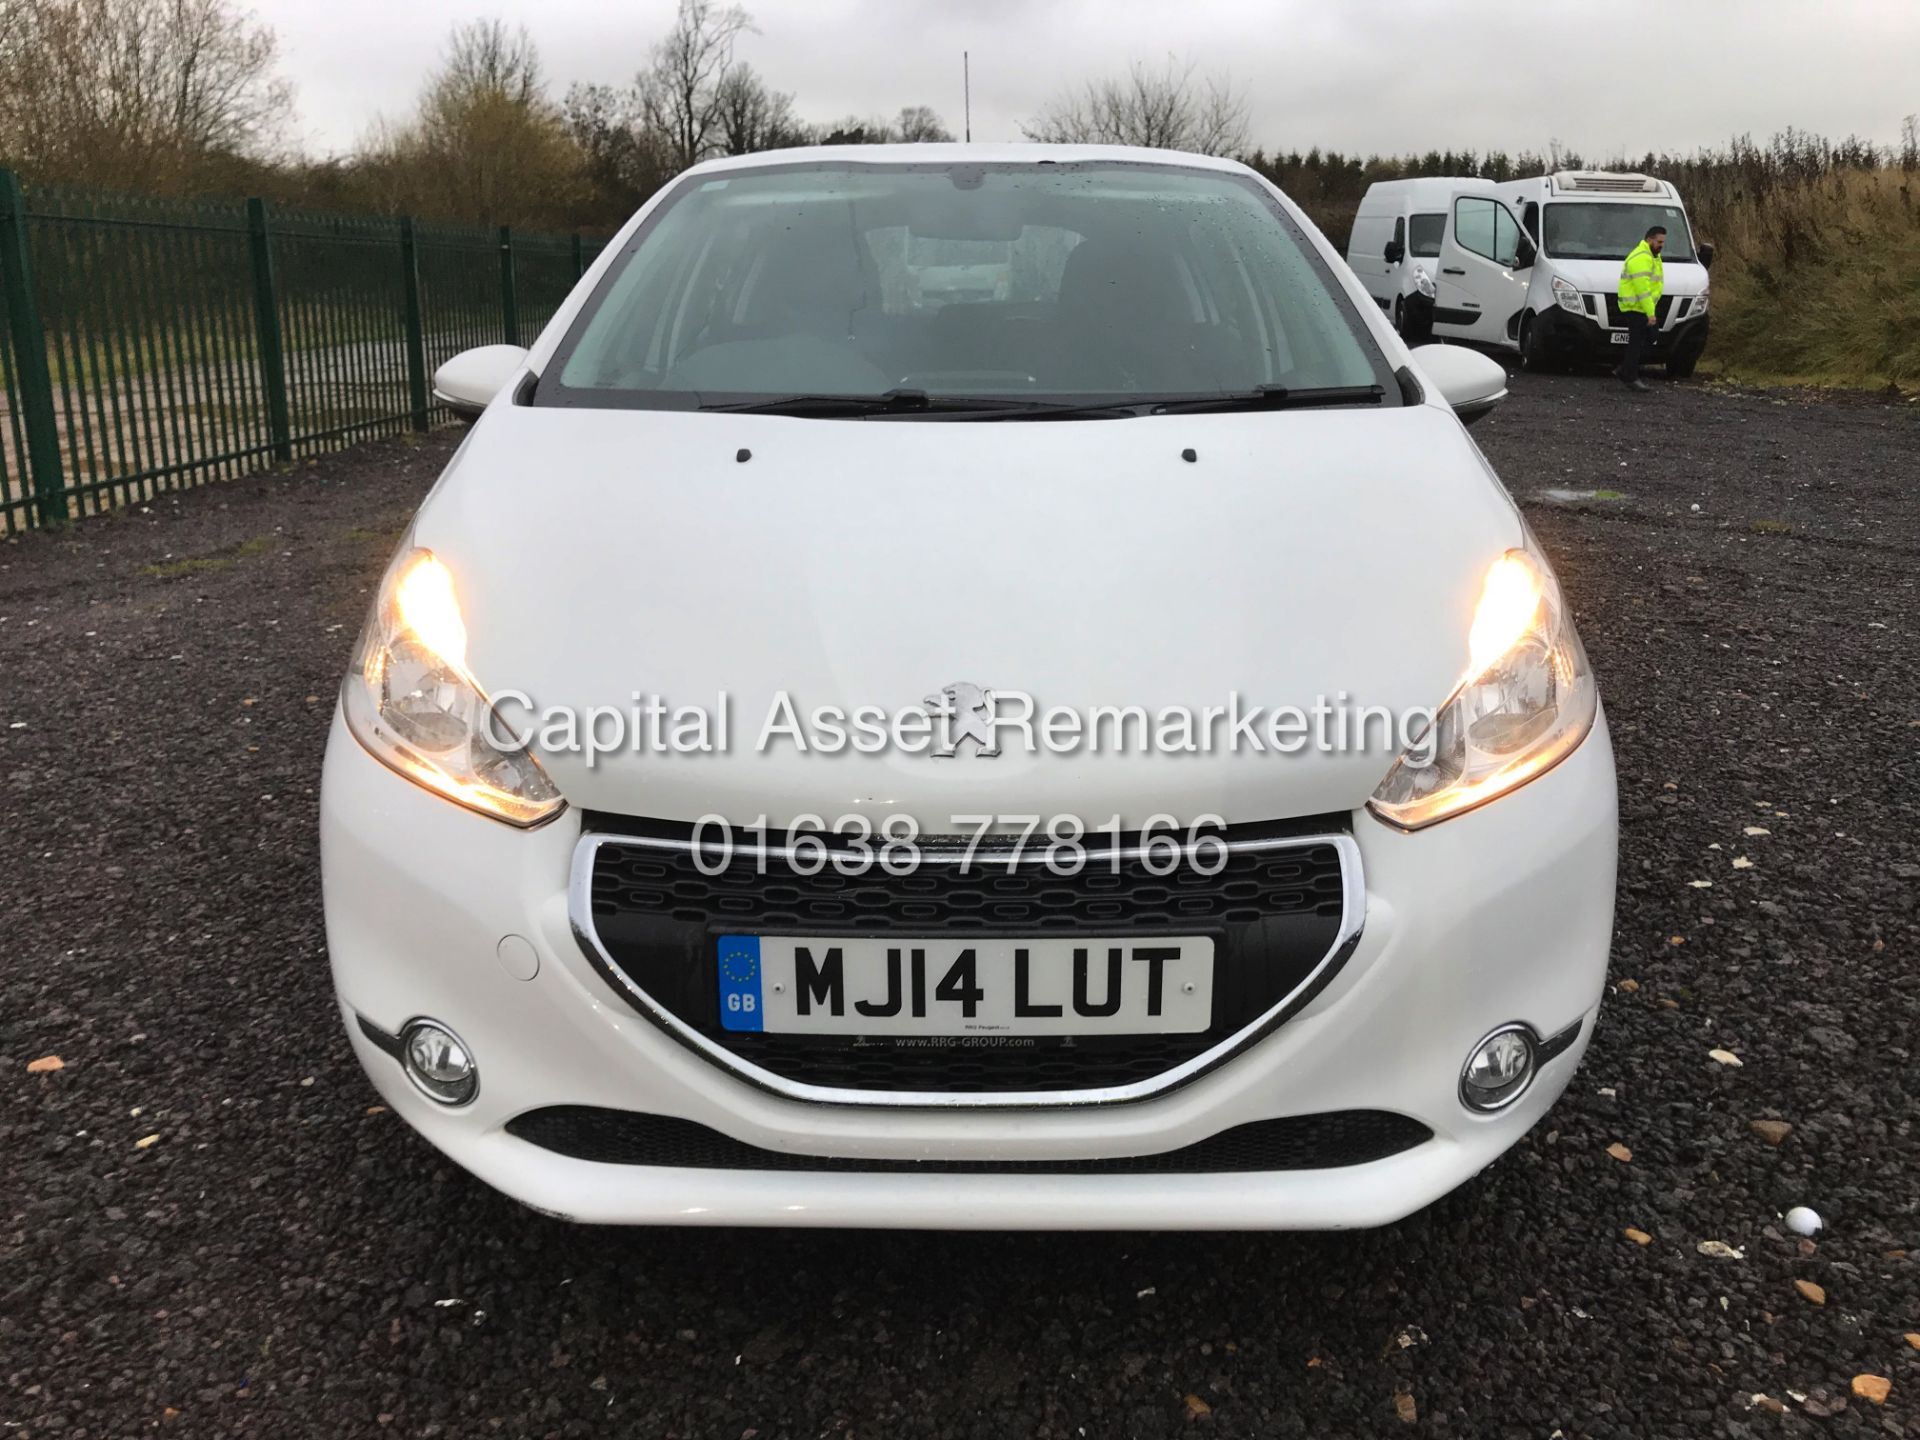 (ON SALE) PEUGEOT 208 1.4HDI "ACTIVE" 1 PREVIOUS KEEPER FSH (14 REG) RECENT SERVICE-AIR CON *NO VAT* - Image 3 of 23